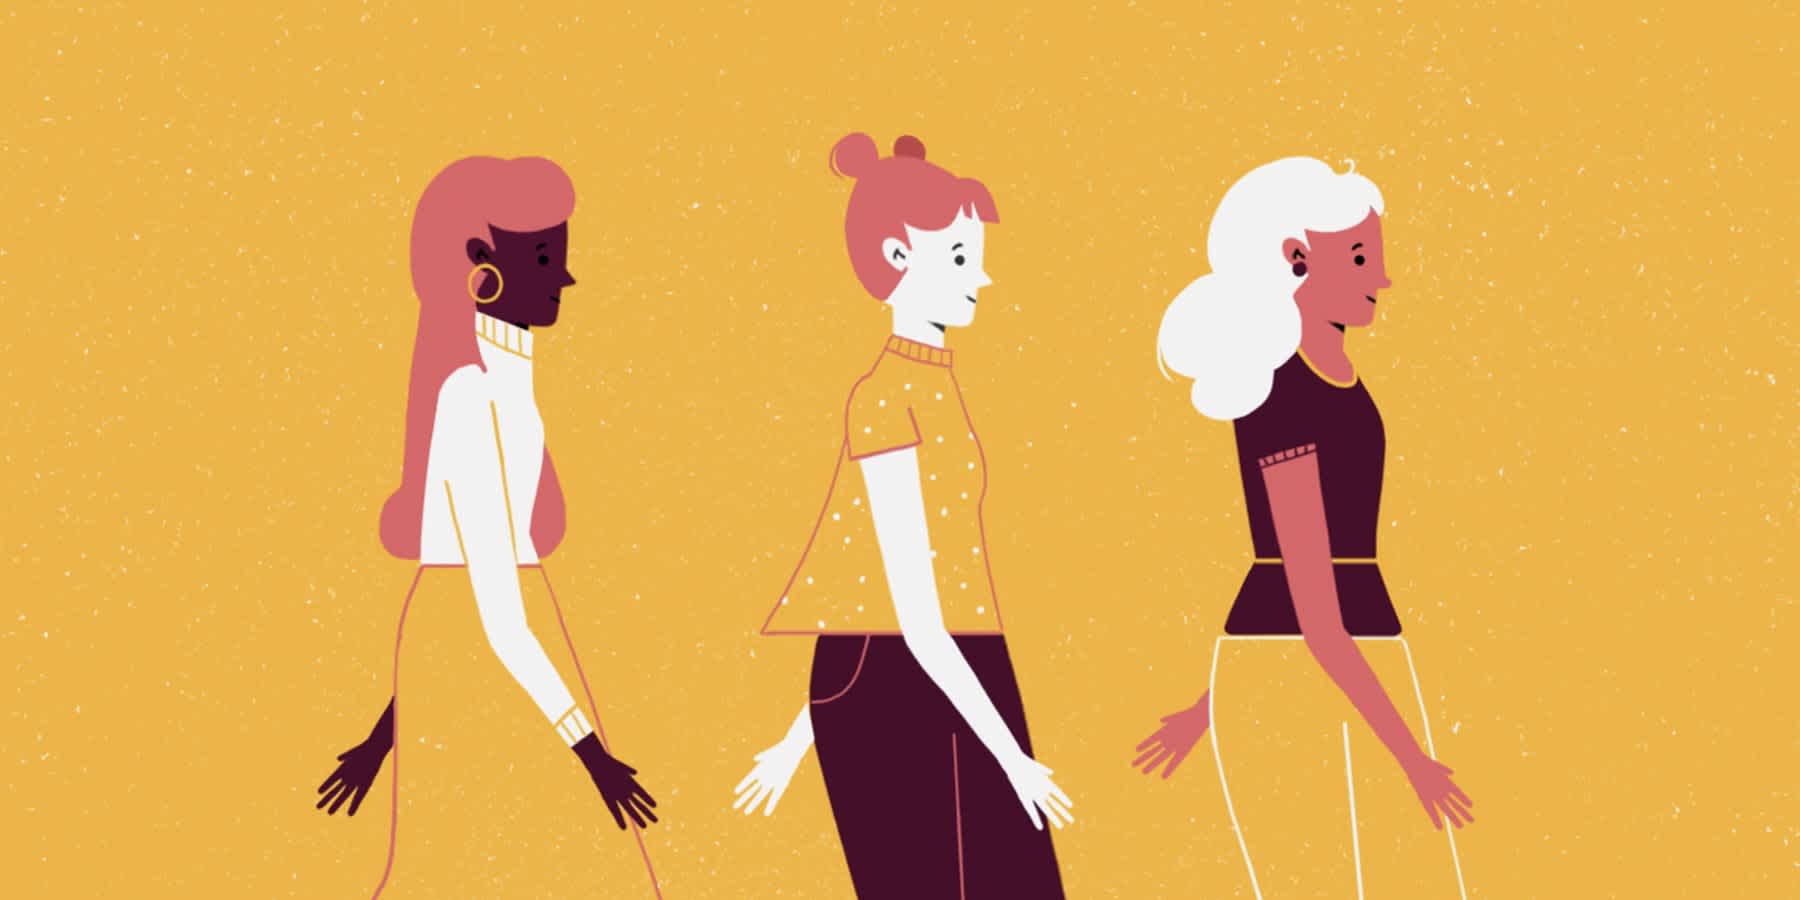 Drawing of three women walking against a yellow background